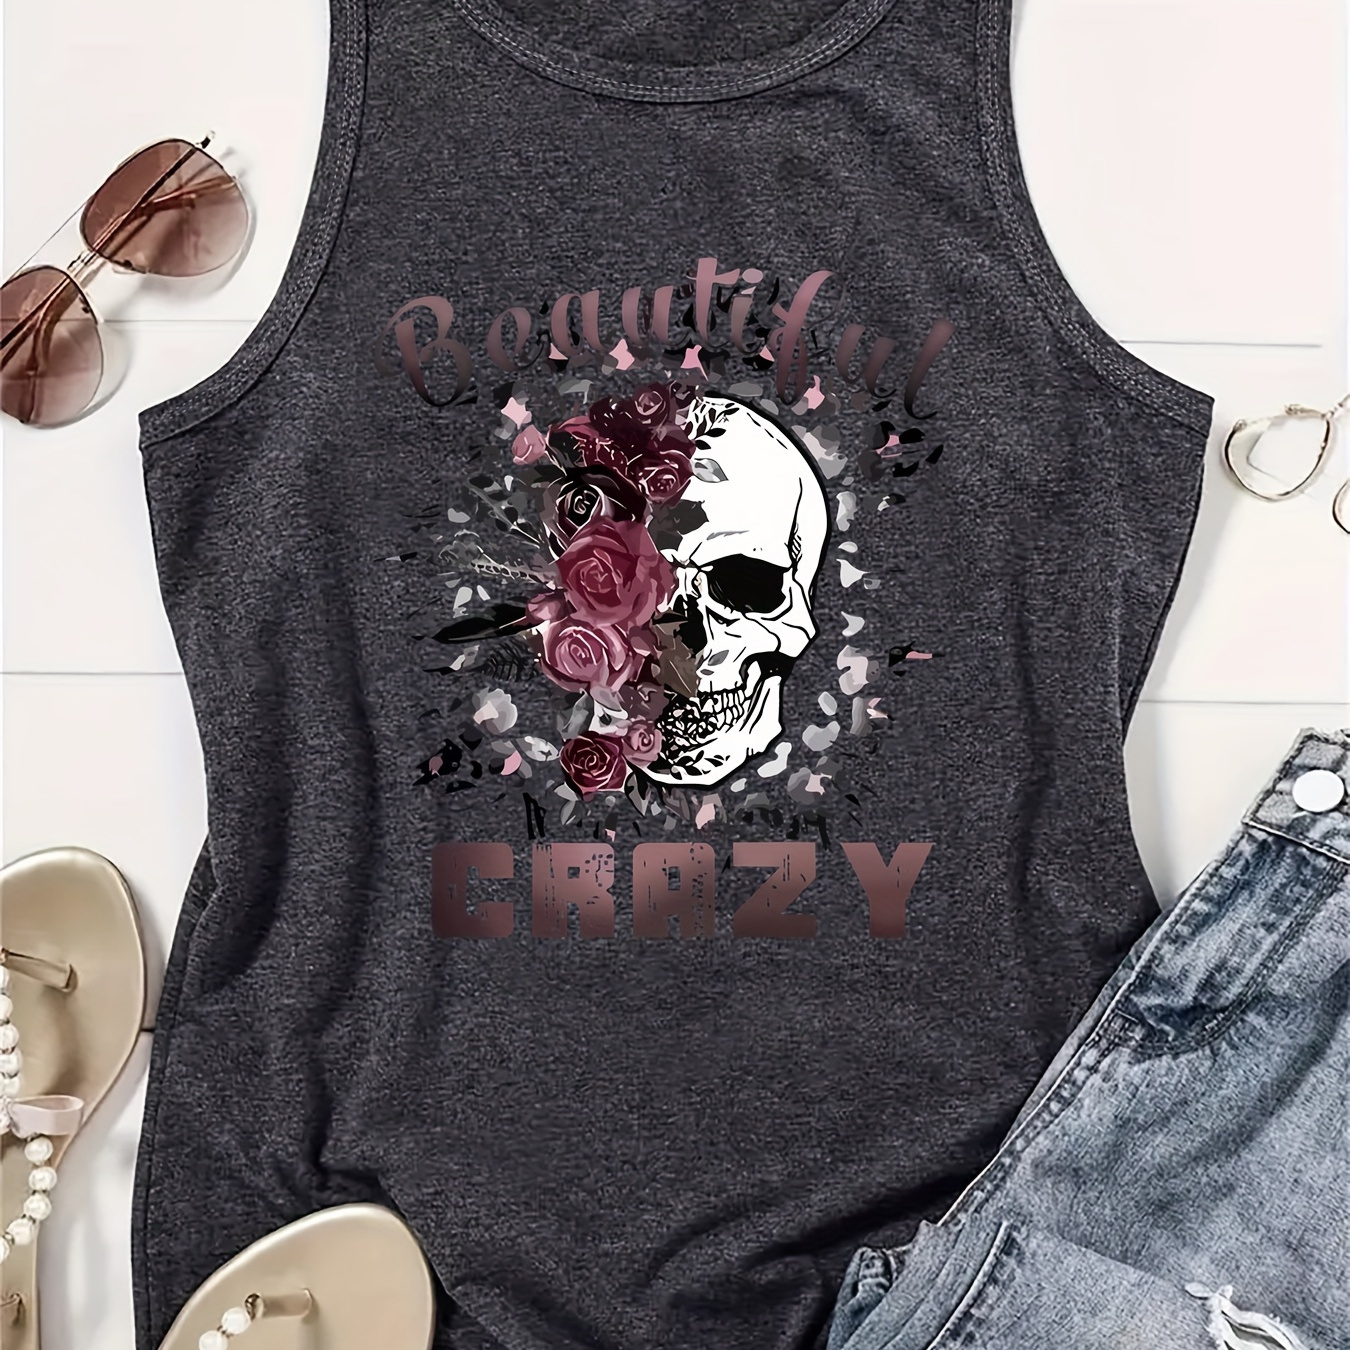 

Plus Size Crazy & Skull Print Tank Top, Casual Sleeveless Crew Neck Top For Summer & Spring, Women's Plus Size Clothing